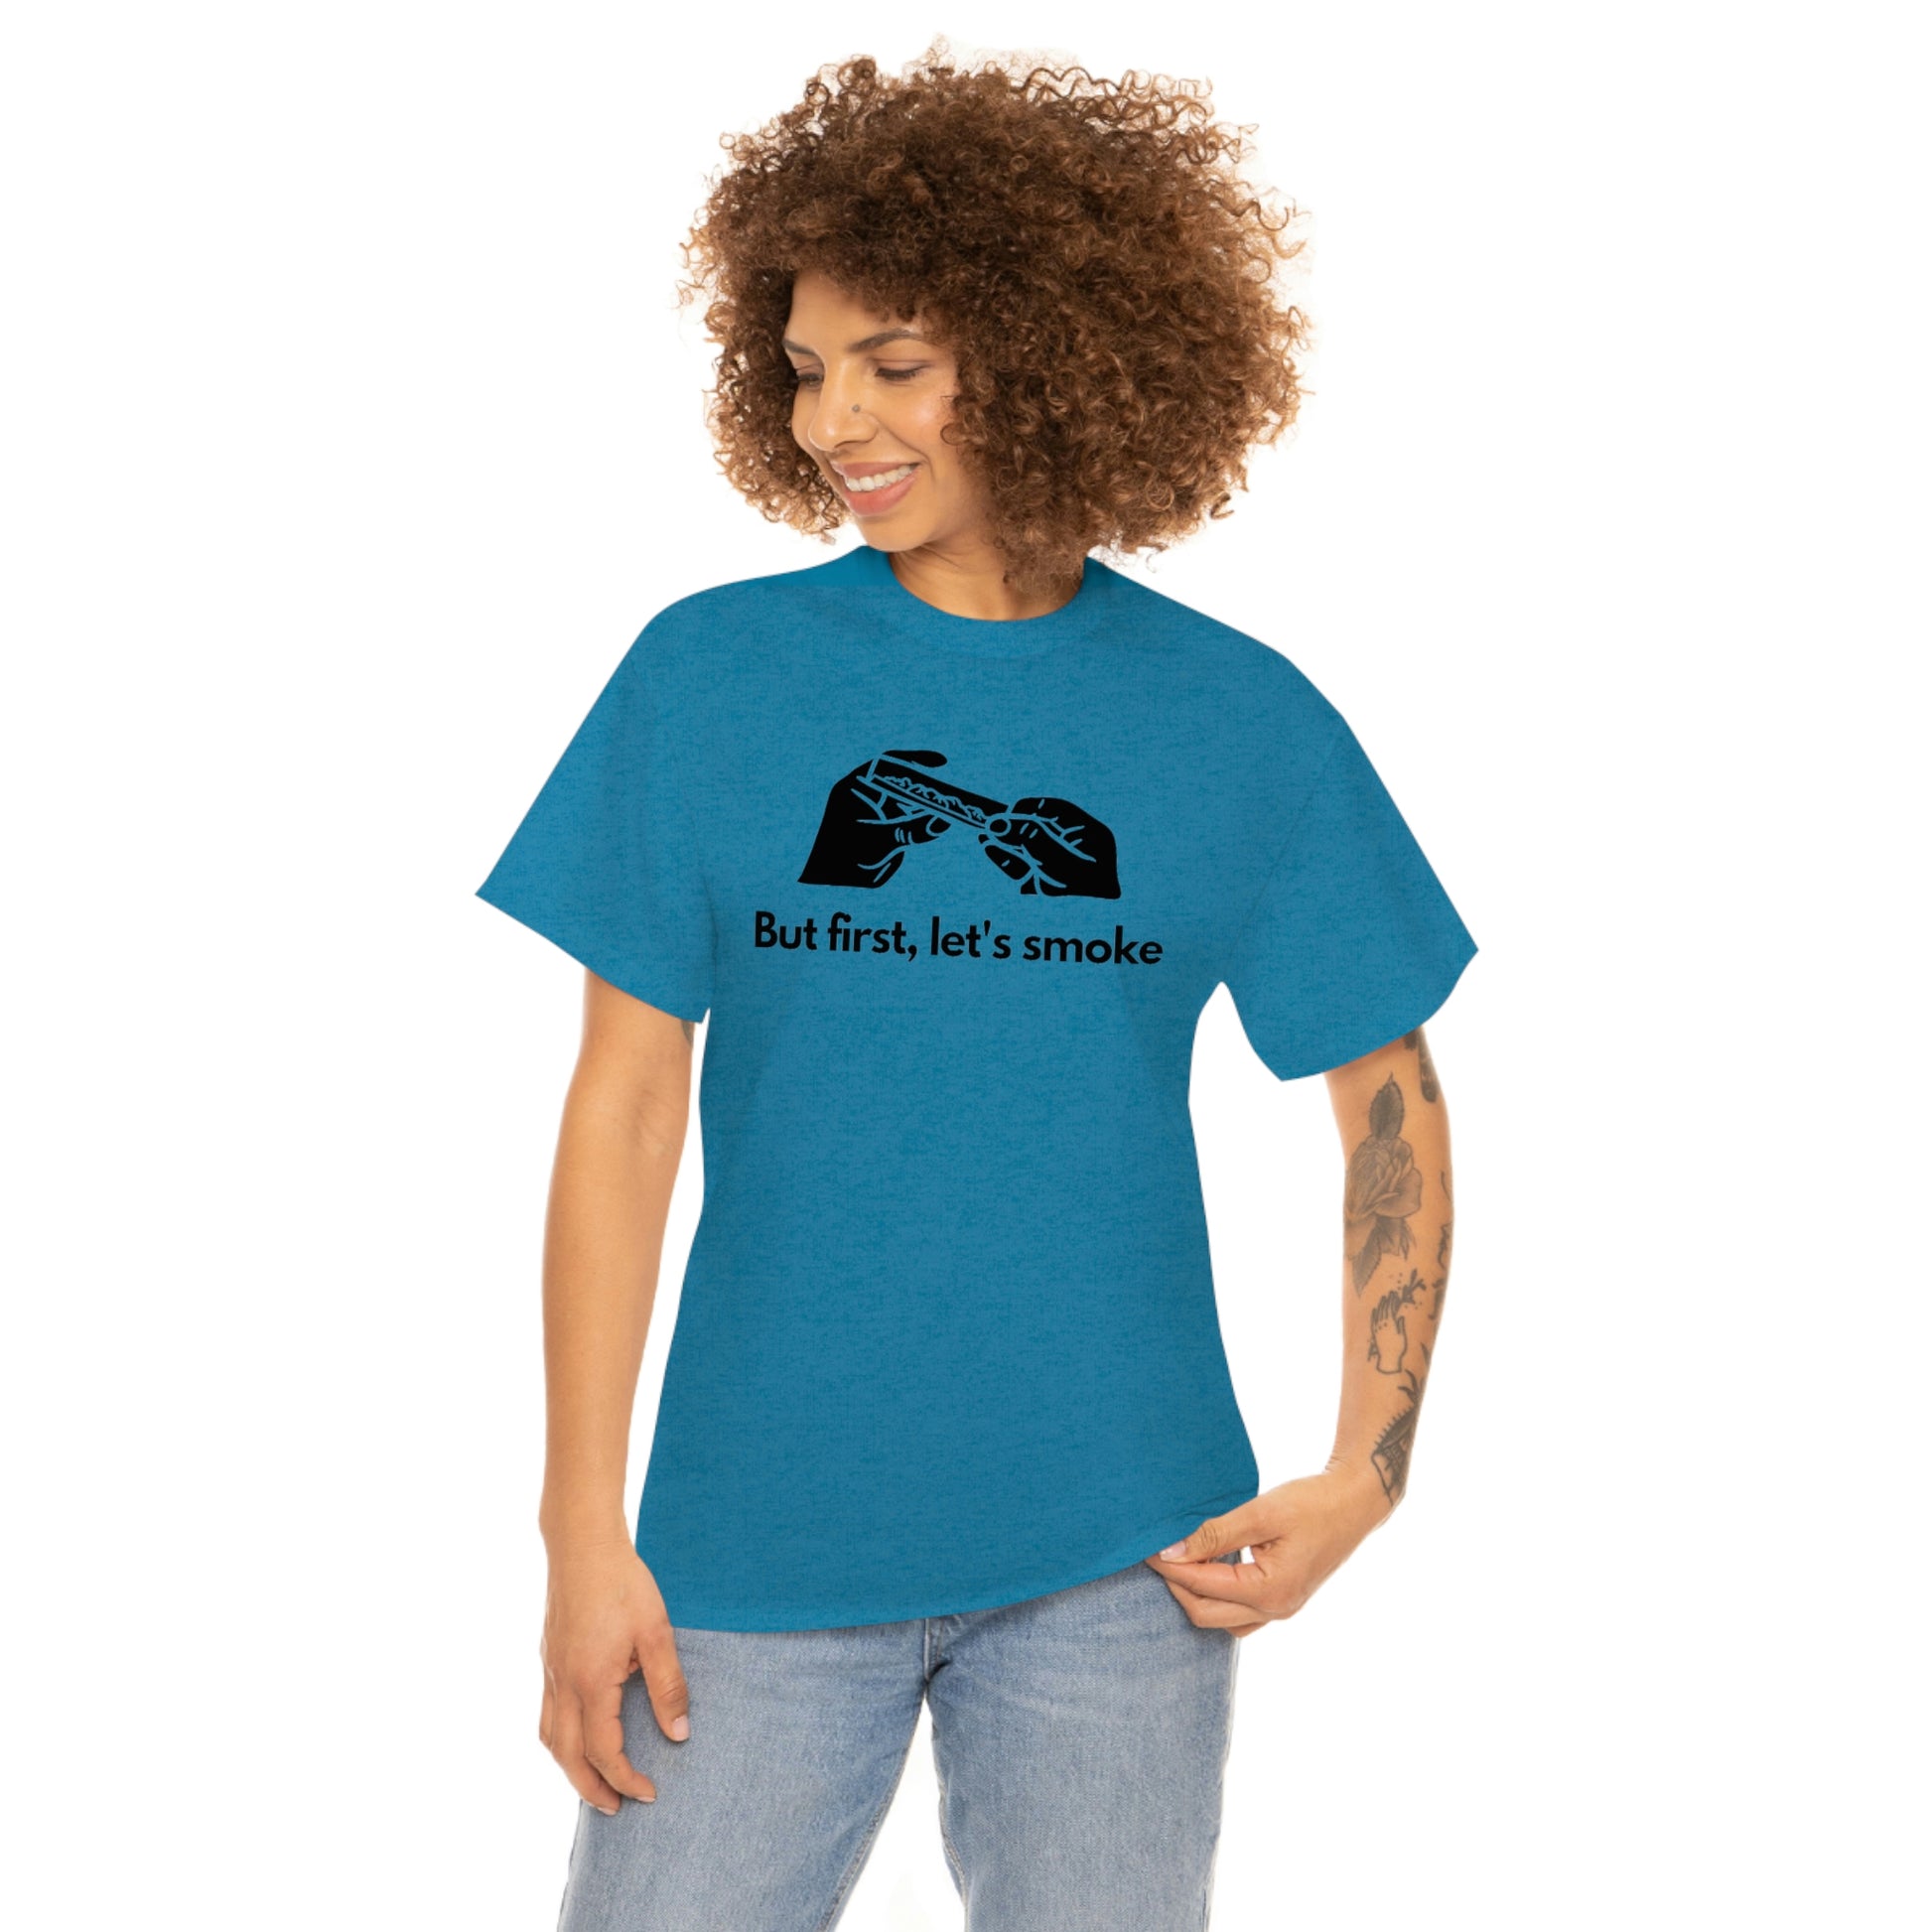 A woman wearing a turquoise t-shirt that says "But First, Let's Smoke Tee.